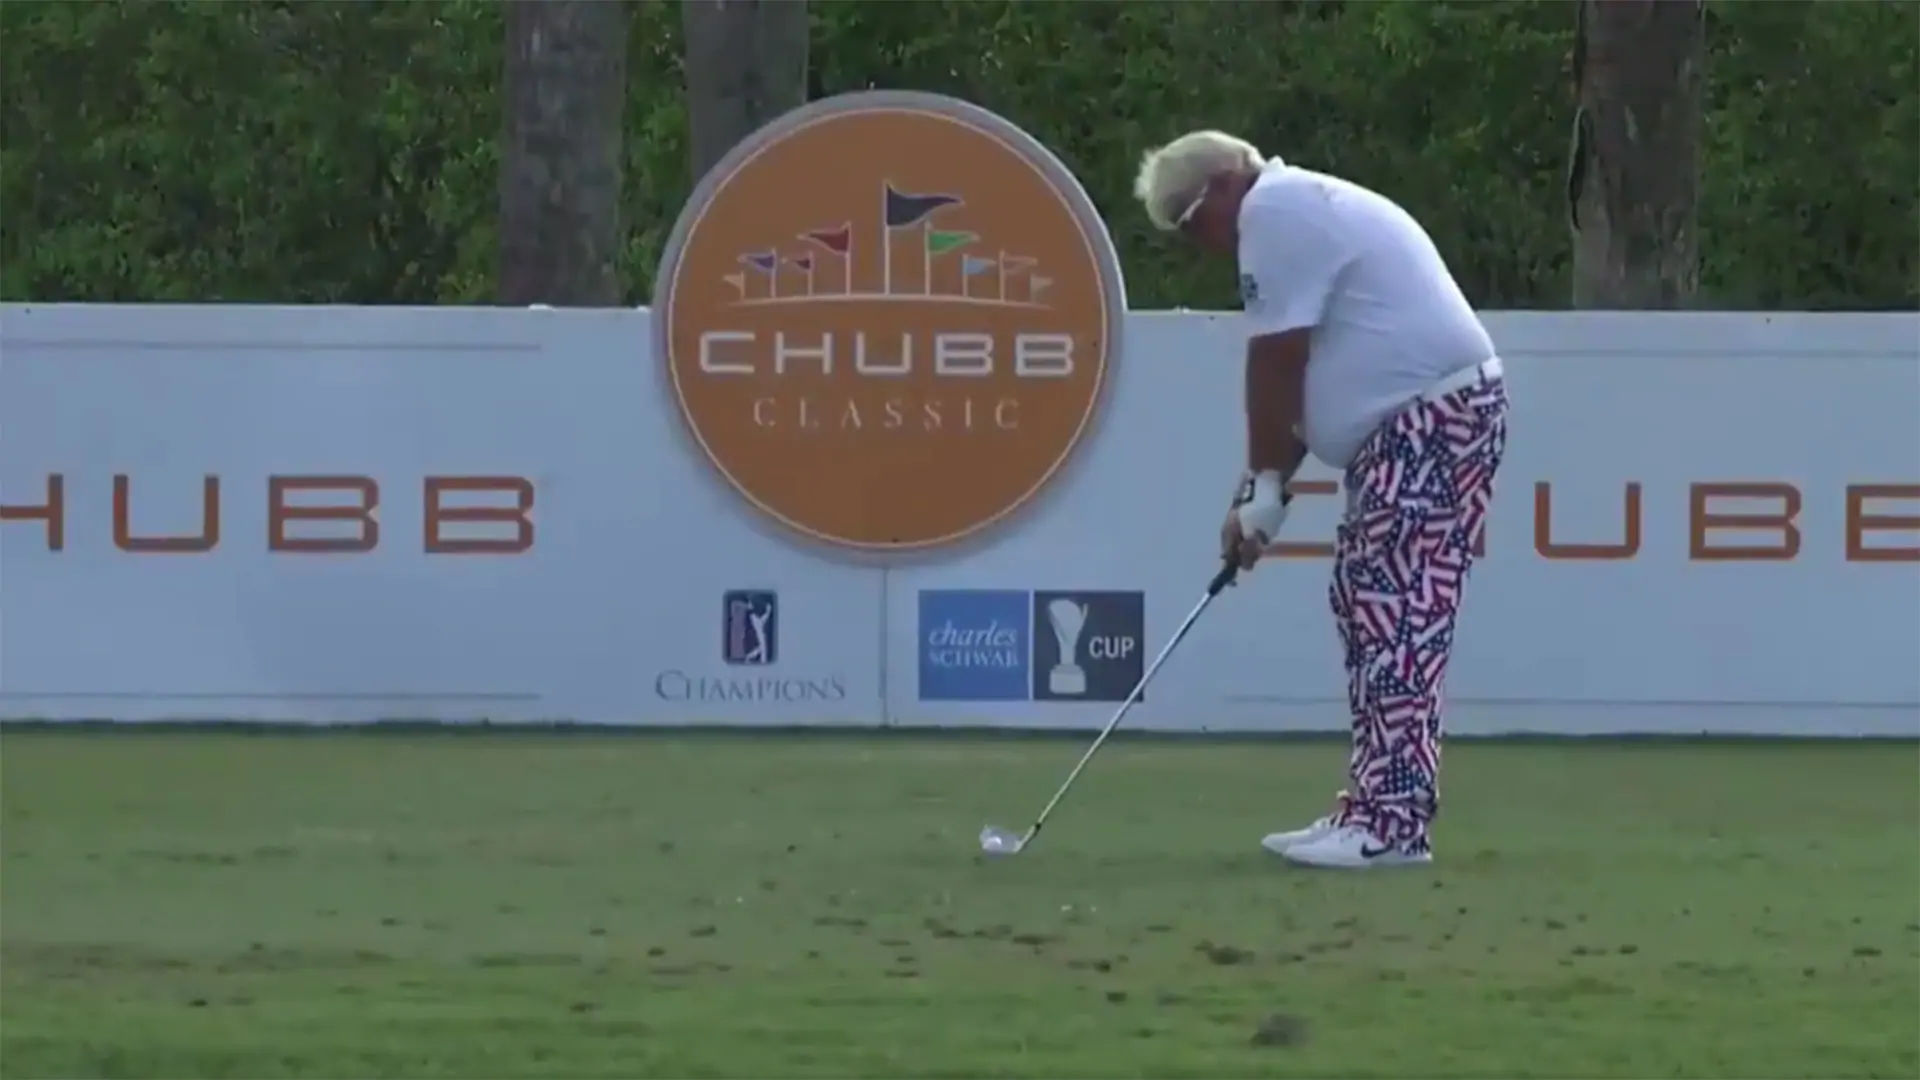 Watch: Daly makes an ace at the Chubb Classic